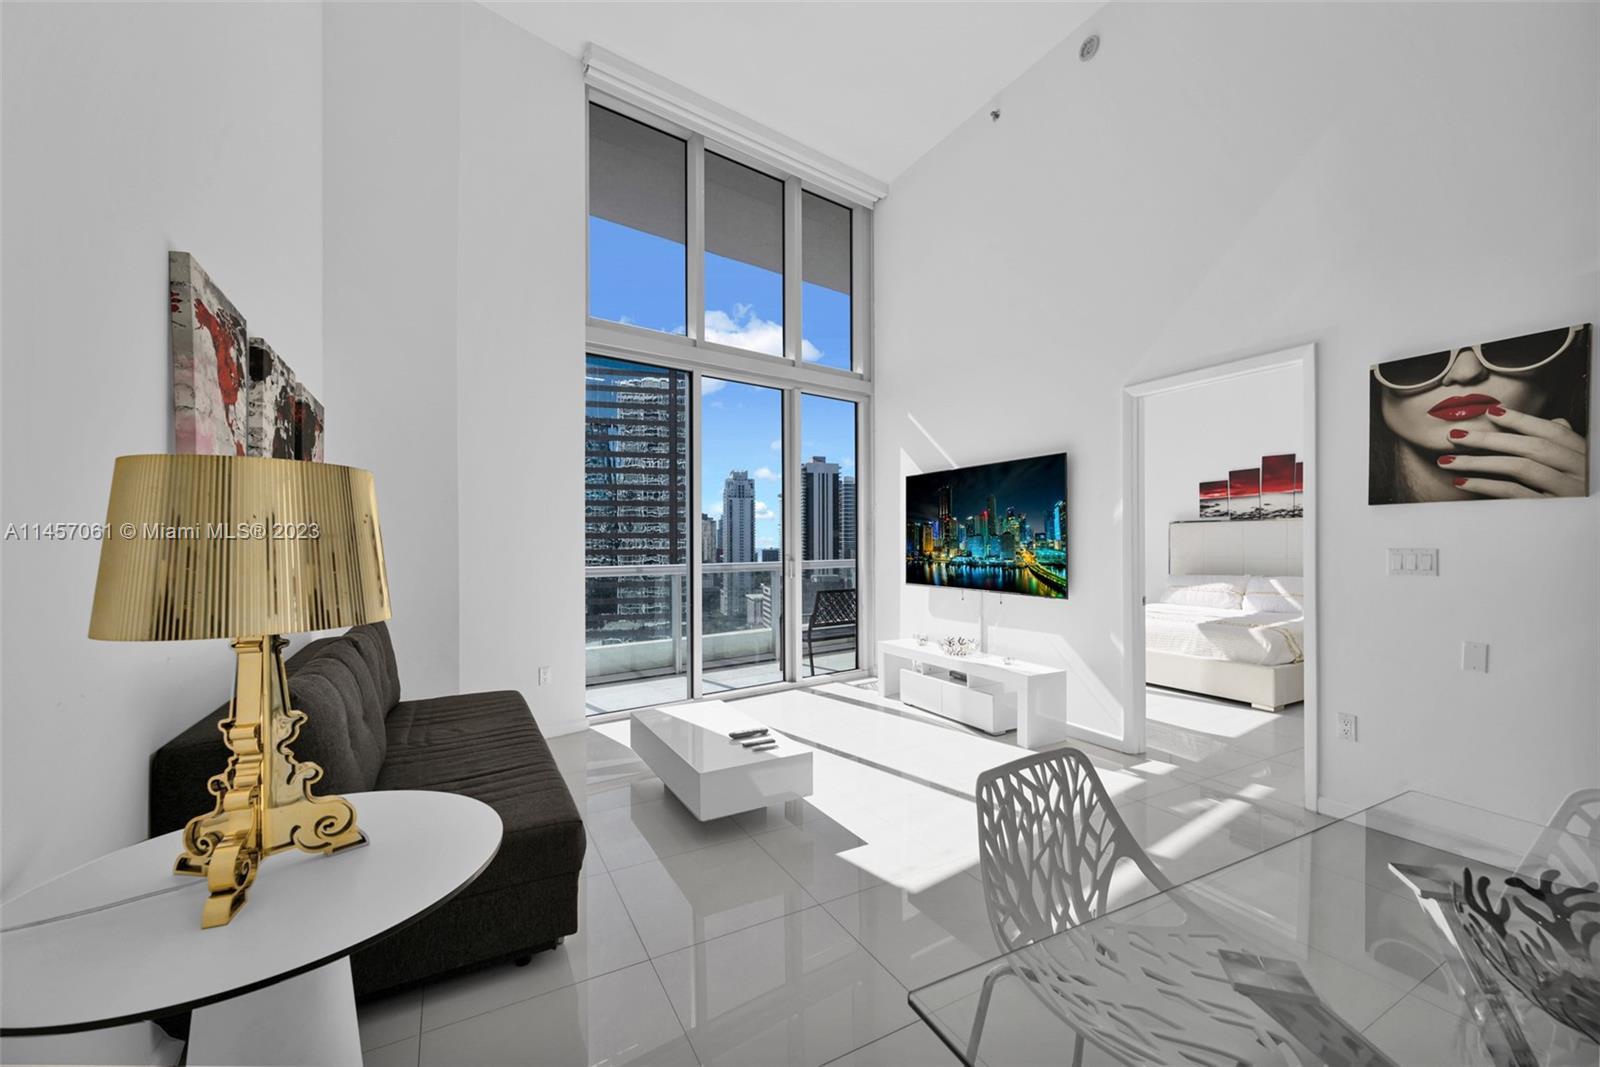 5-Star resort experience in 3 beds breathtaking bay views 2 bedrooms home in Icon Brickell Residence